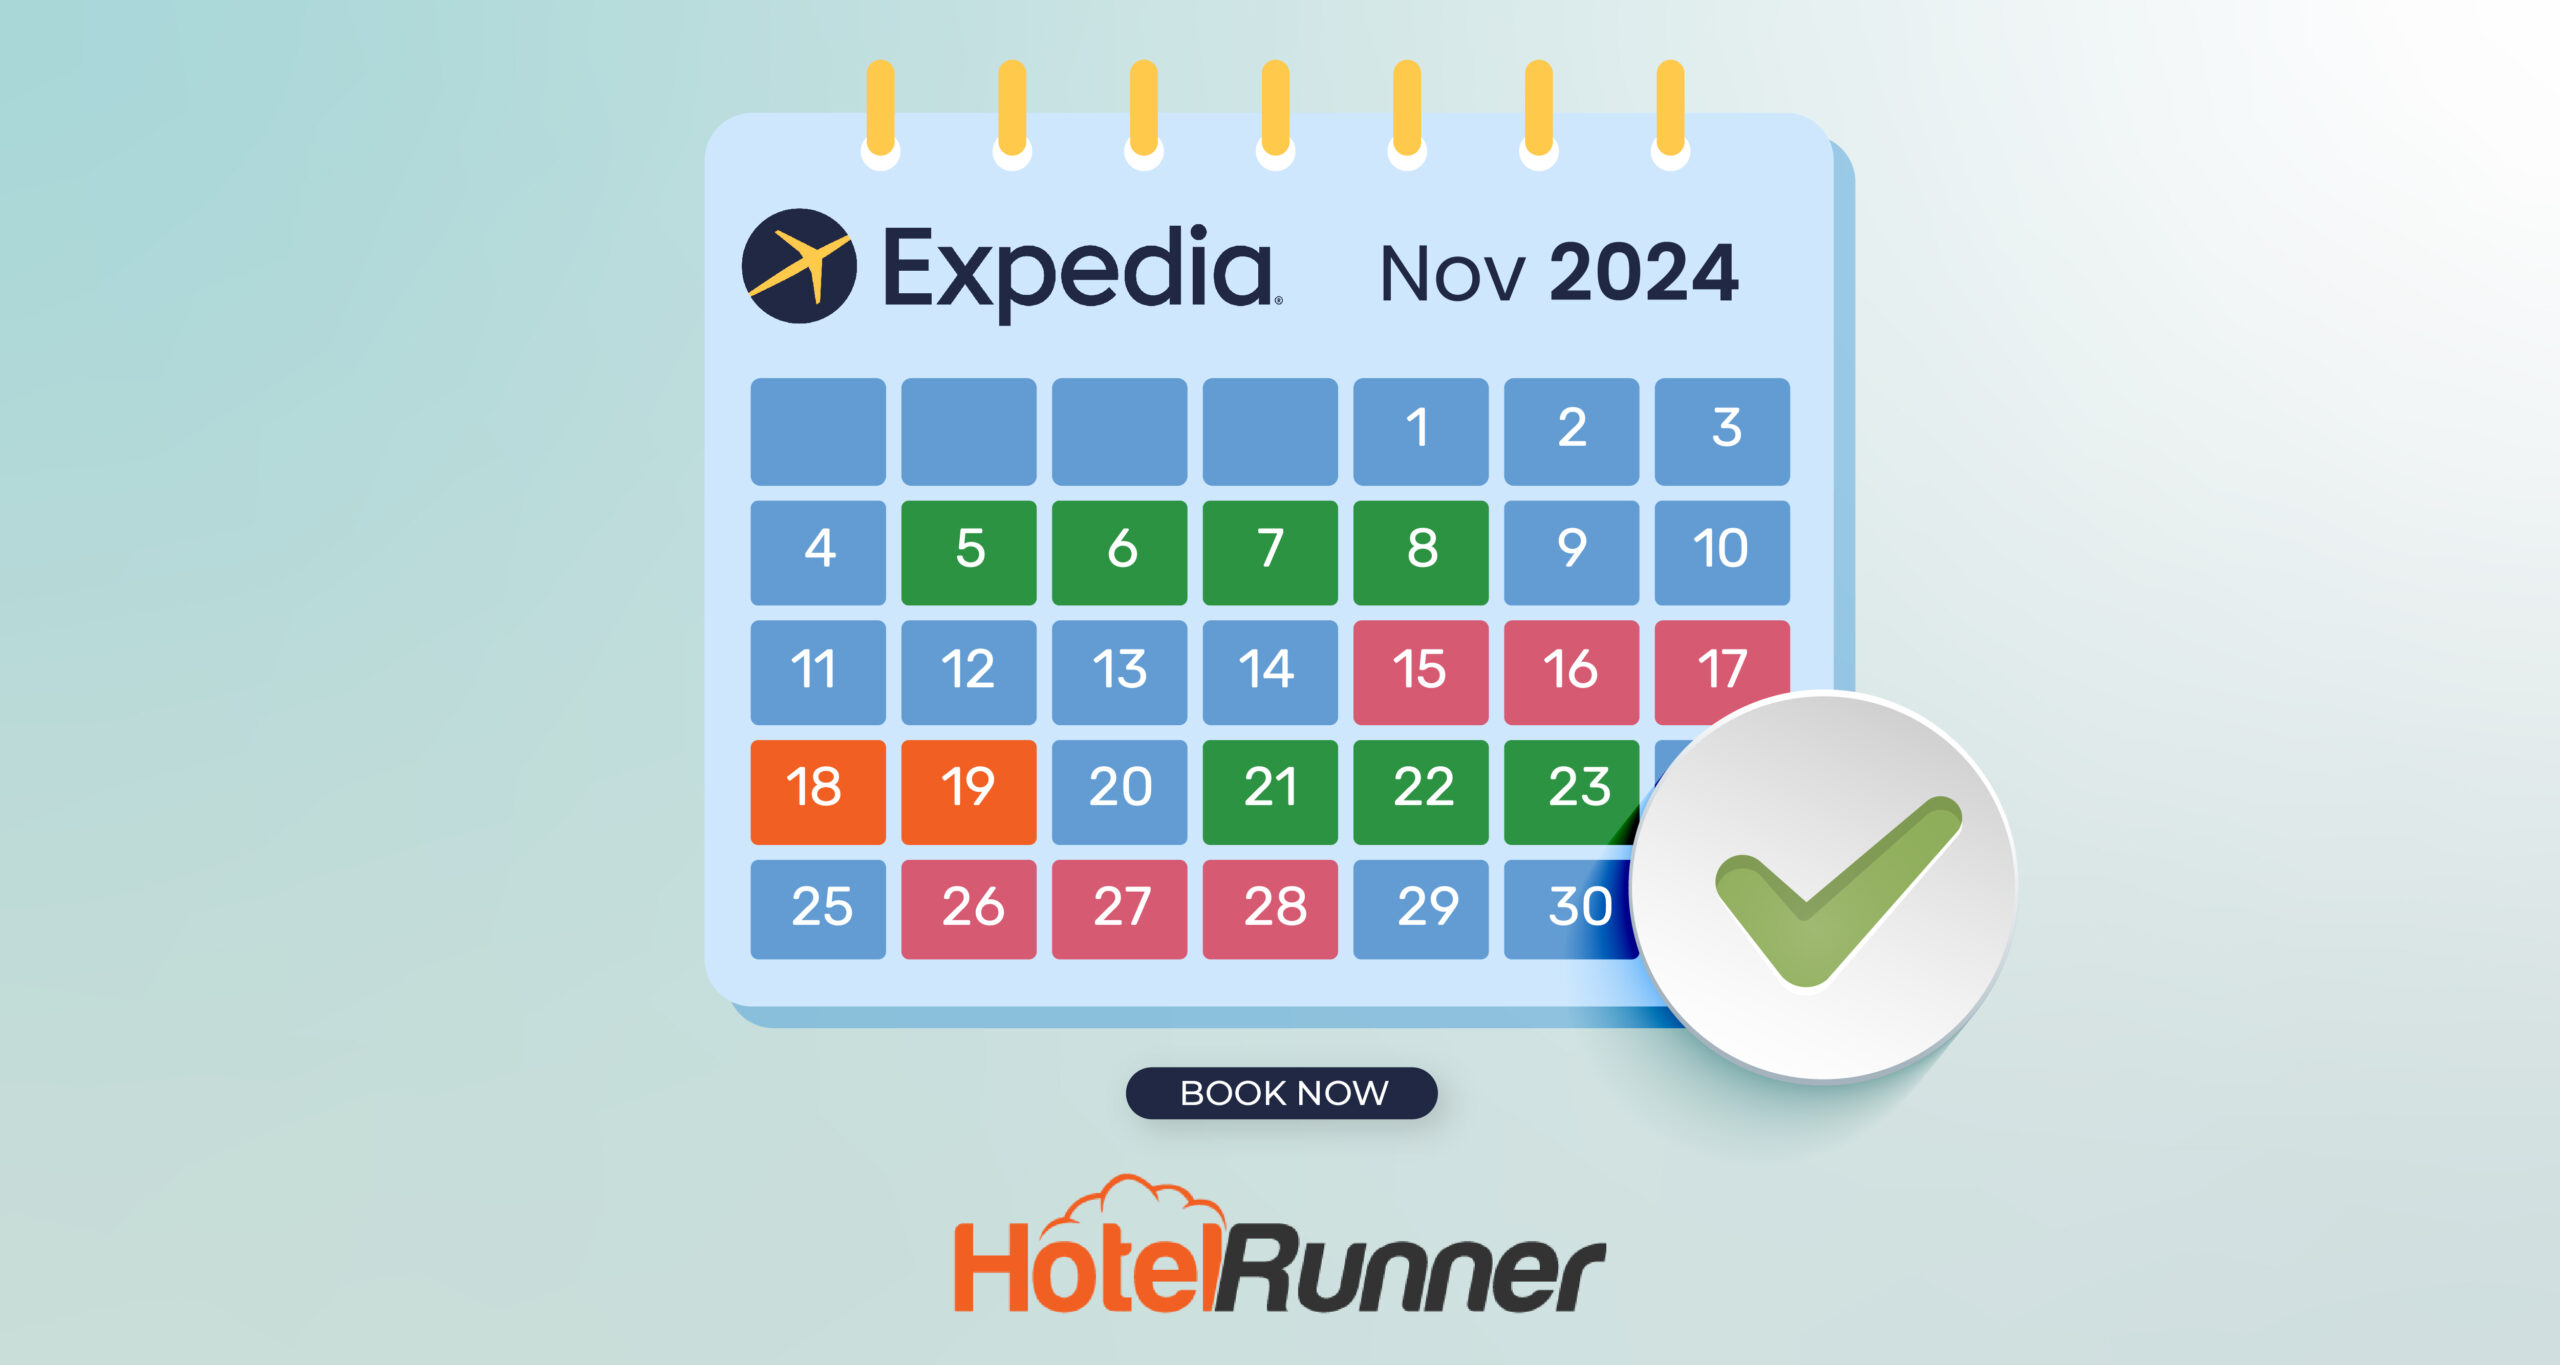 Boost your success on Expedia with early bookers!